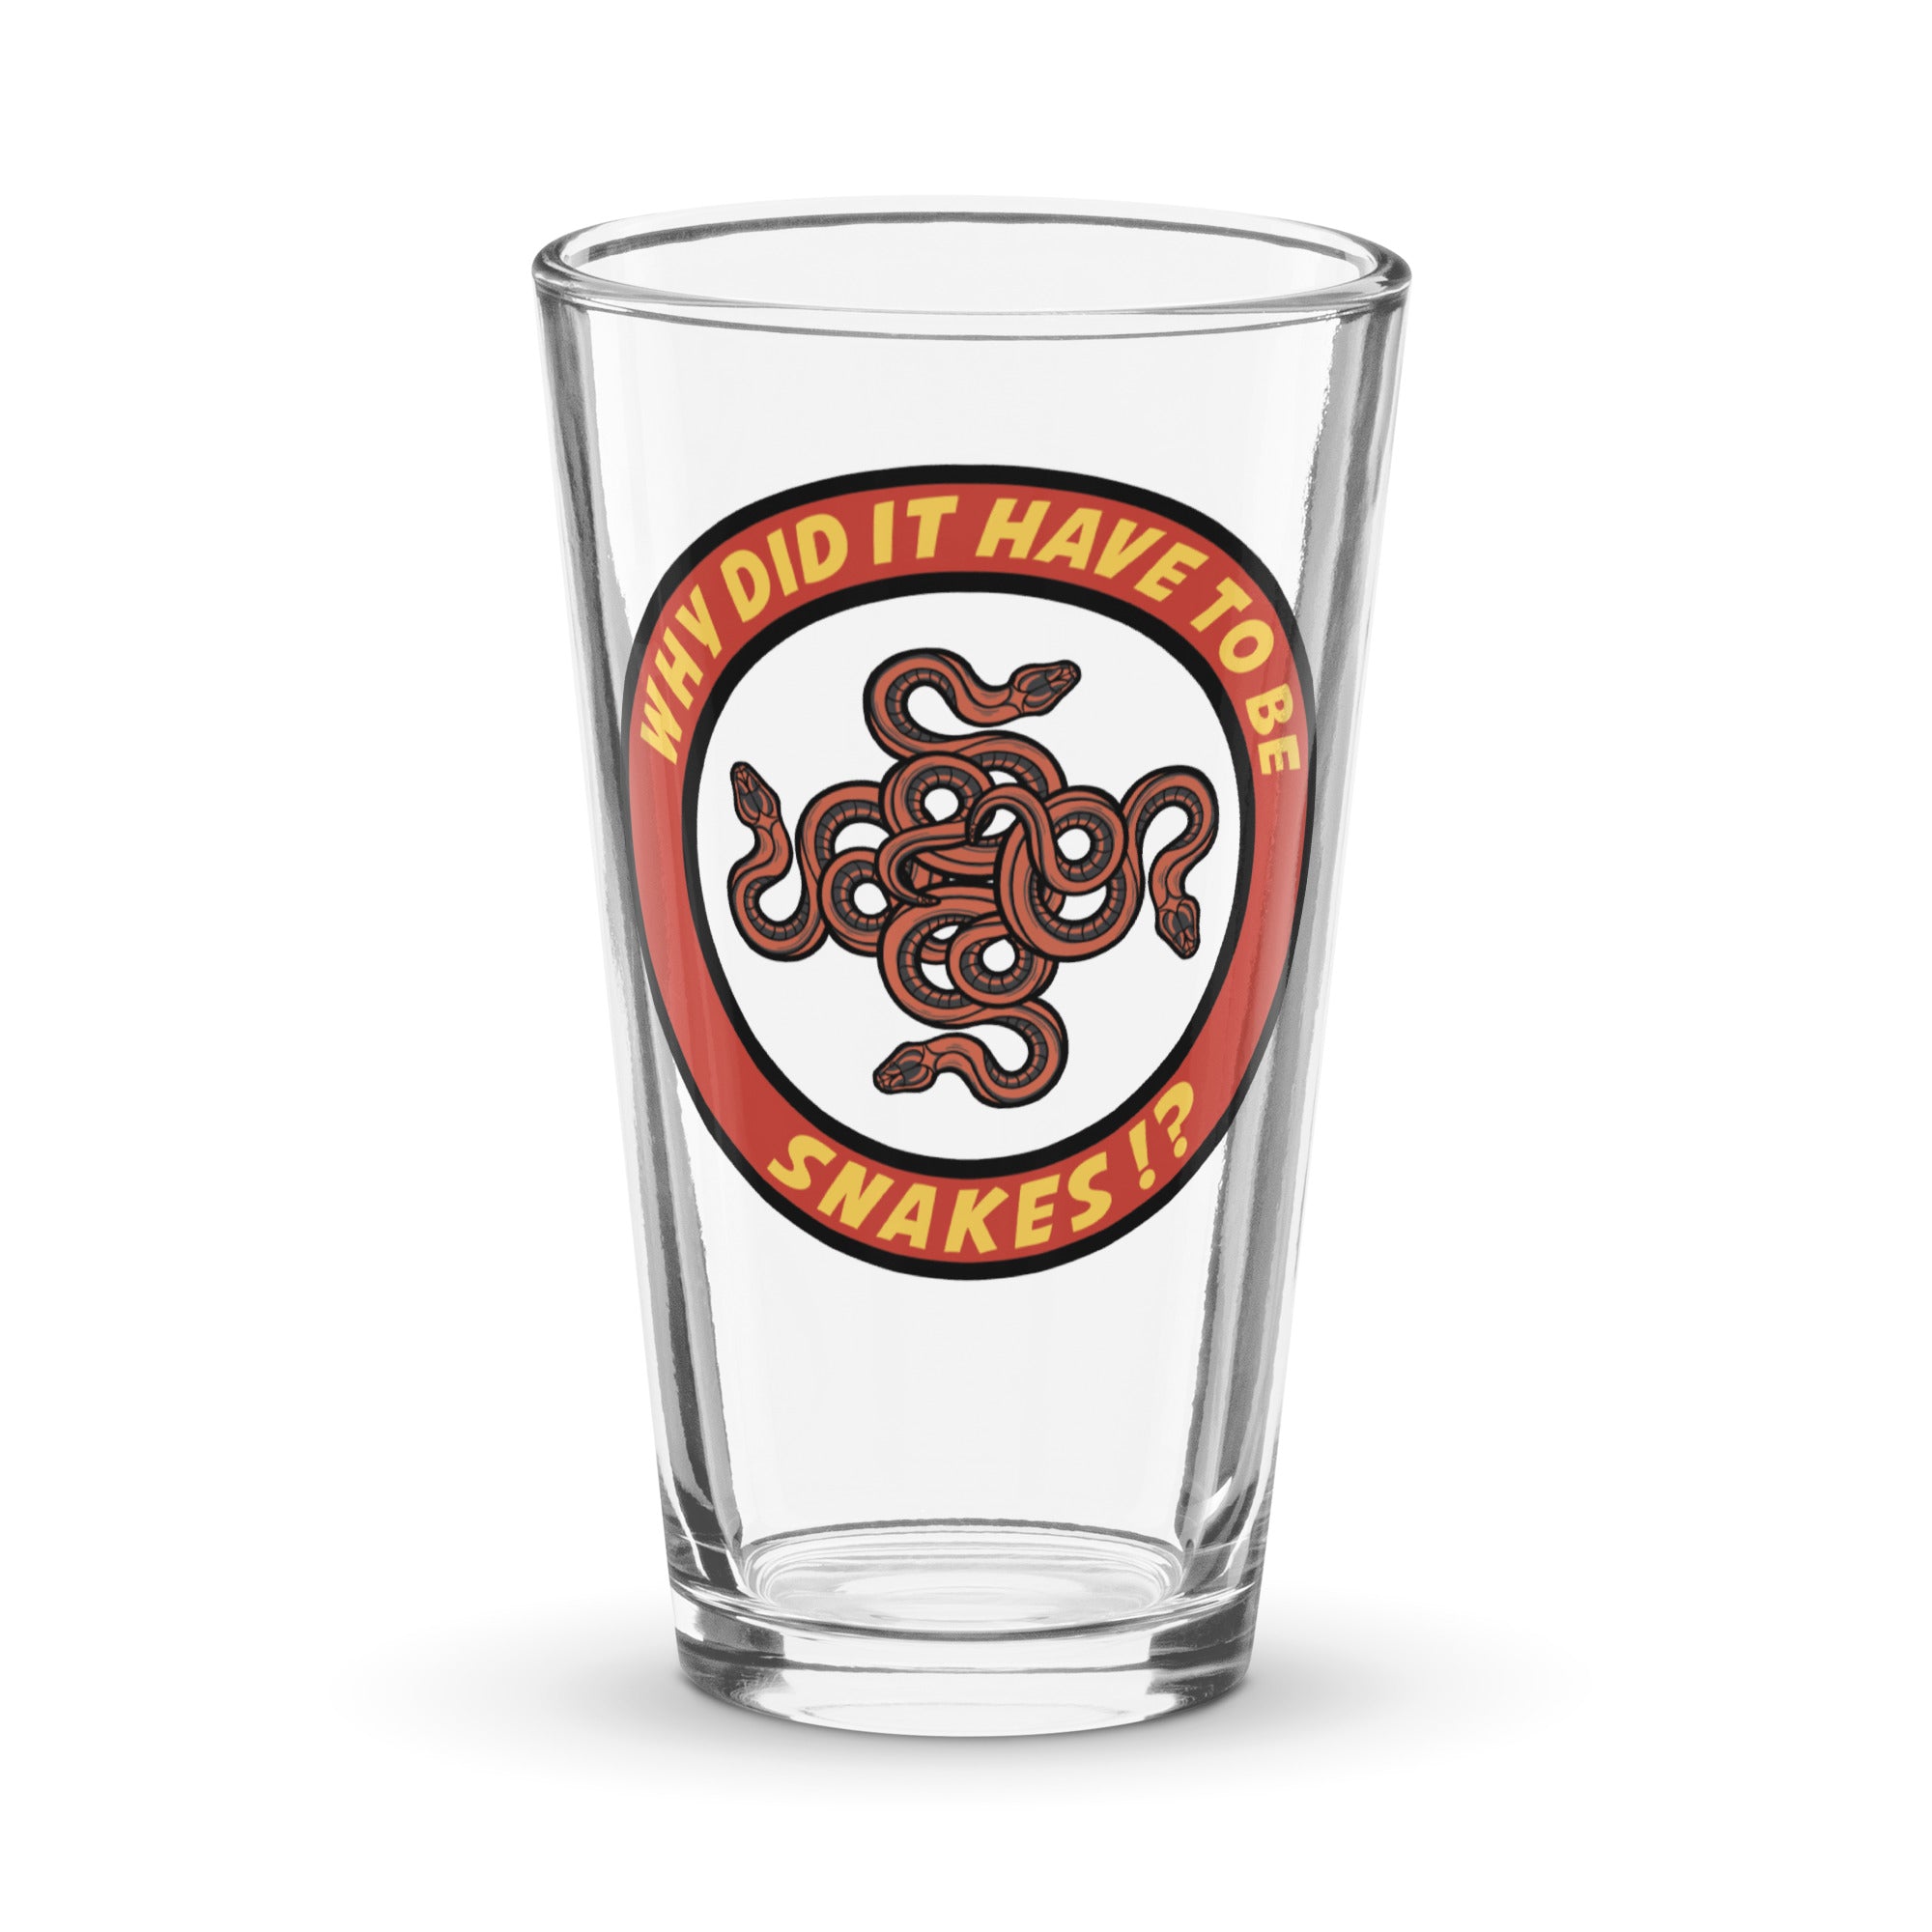 Why Did It Have To Be Snakes? Shaker pint glass